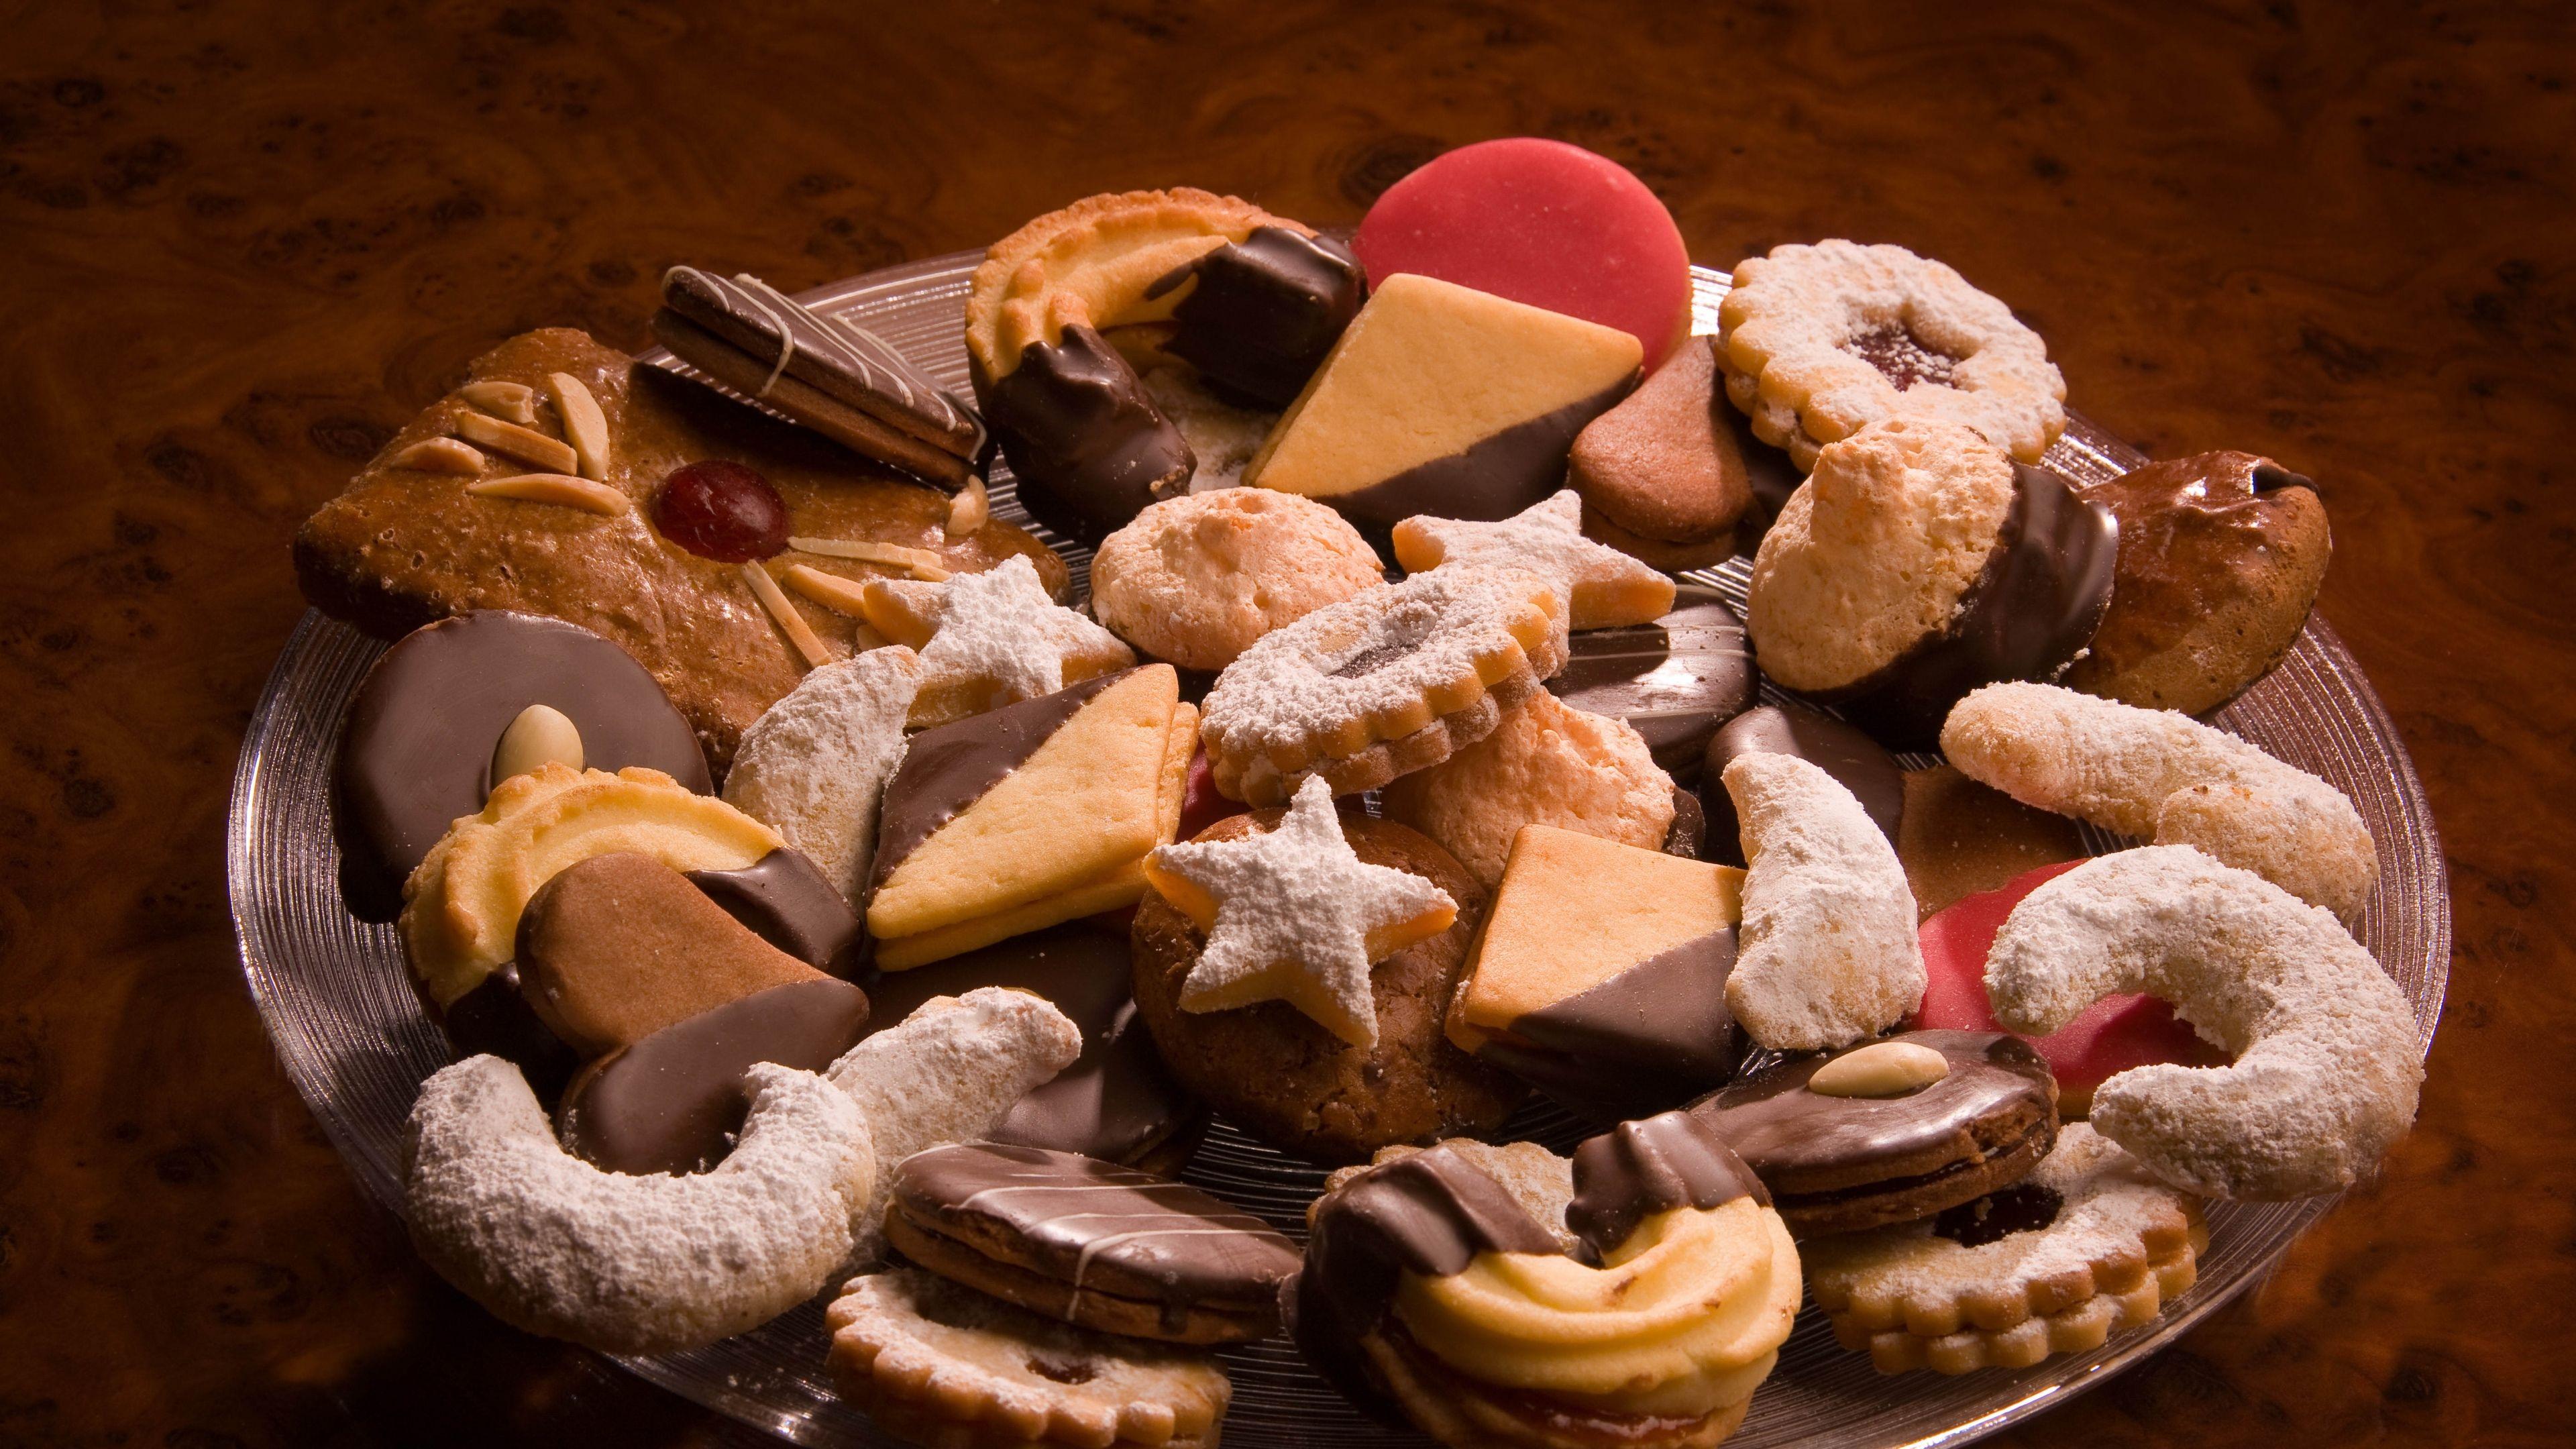 Download Wallpaper 3840x2160 Biscuits, Sweets, Plate, Chocolate